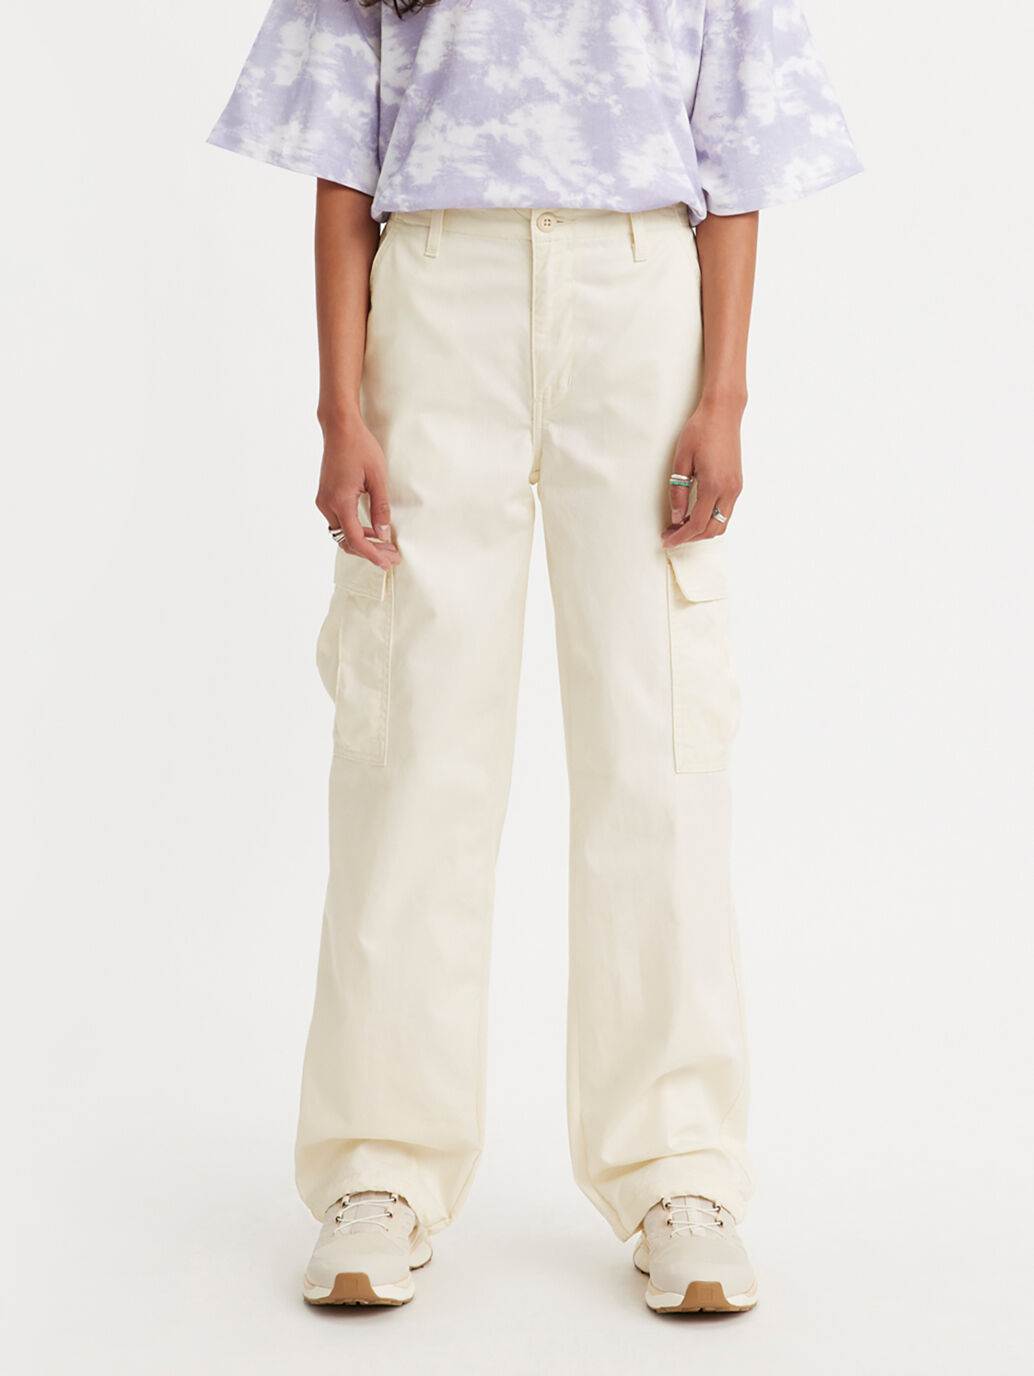 Neutral Baggy Cargo Pants for Women - High-Waisted Fit